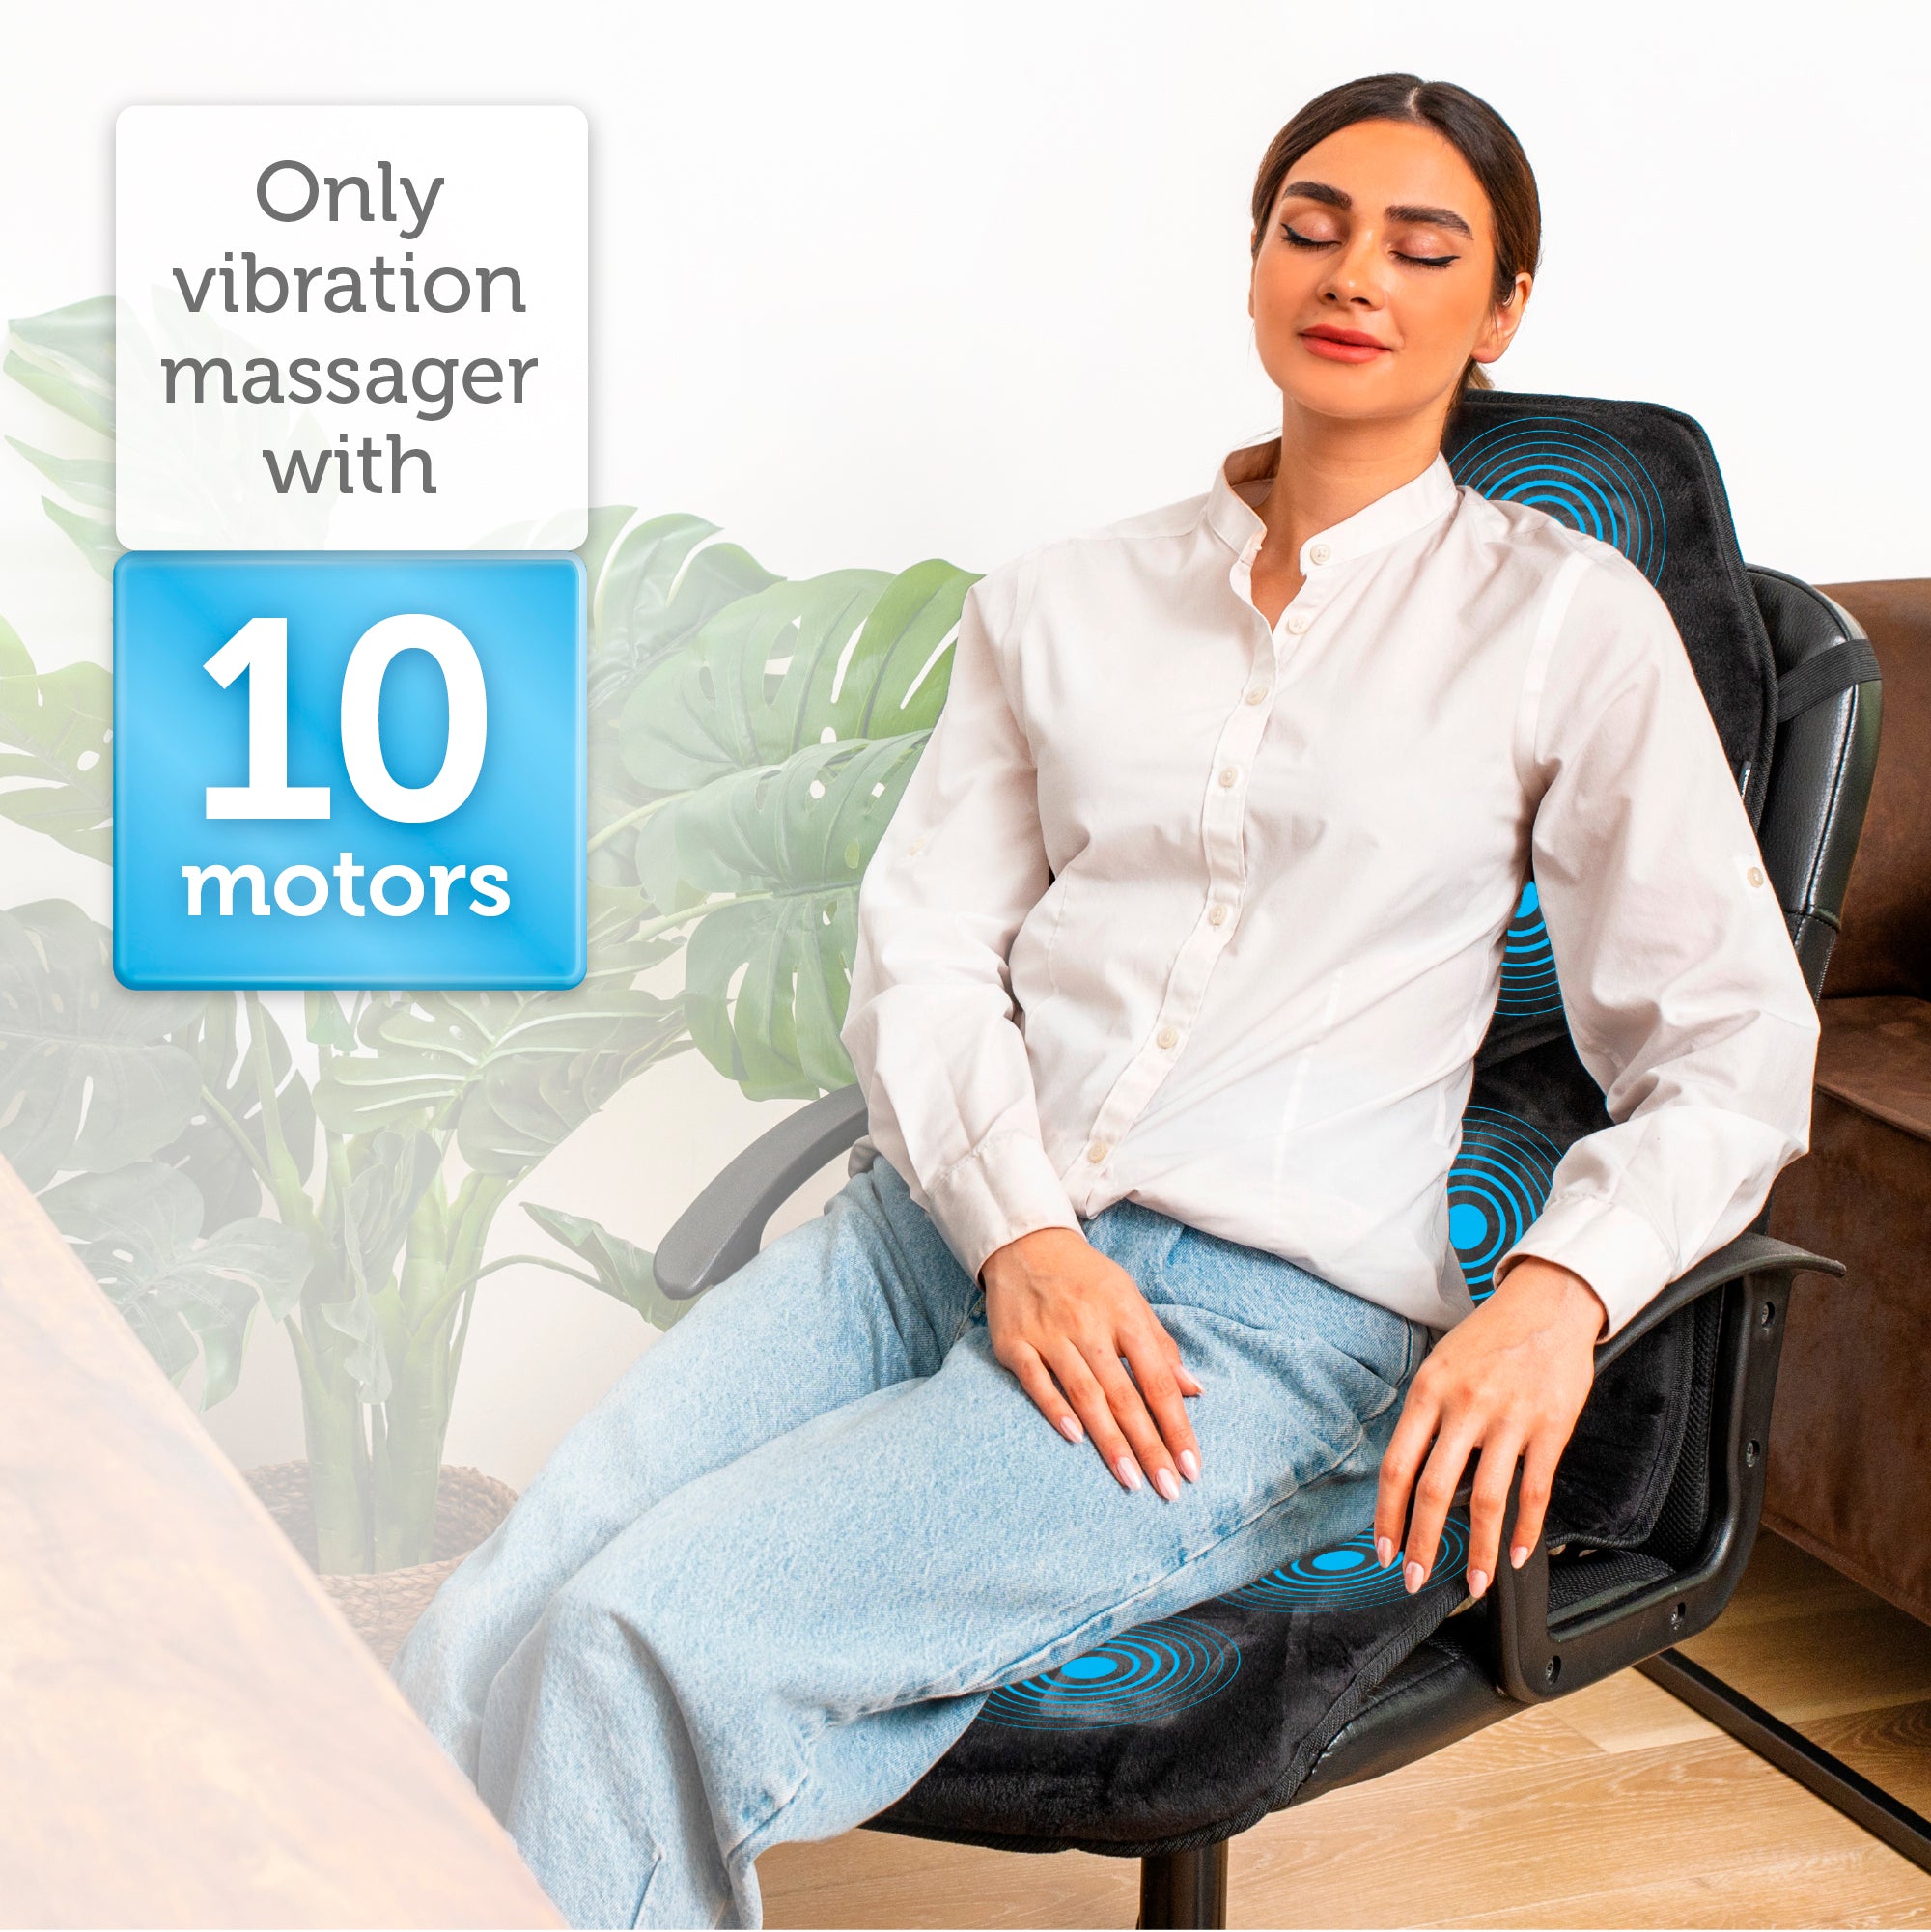 Comfier Vibration Back Massage Cushion with Heat,Massage Pad for Home or Office Chair - 2206